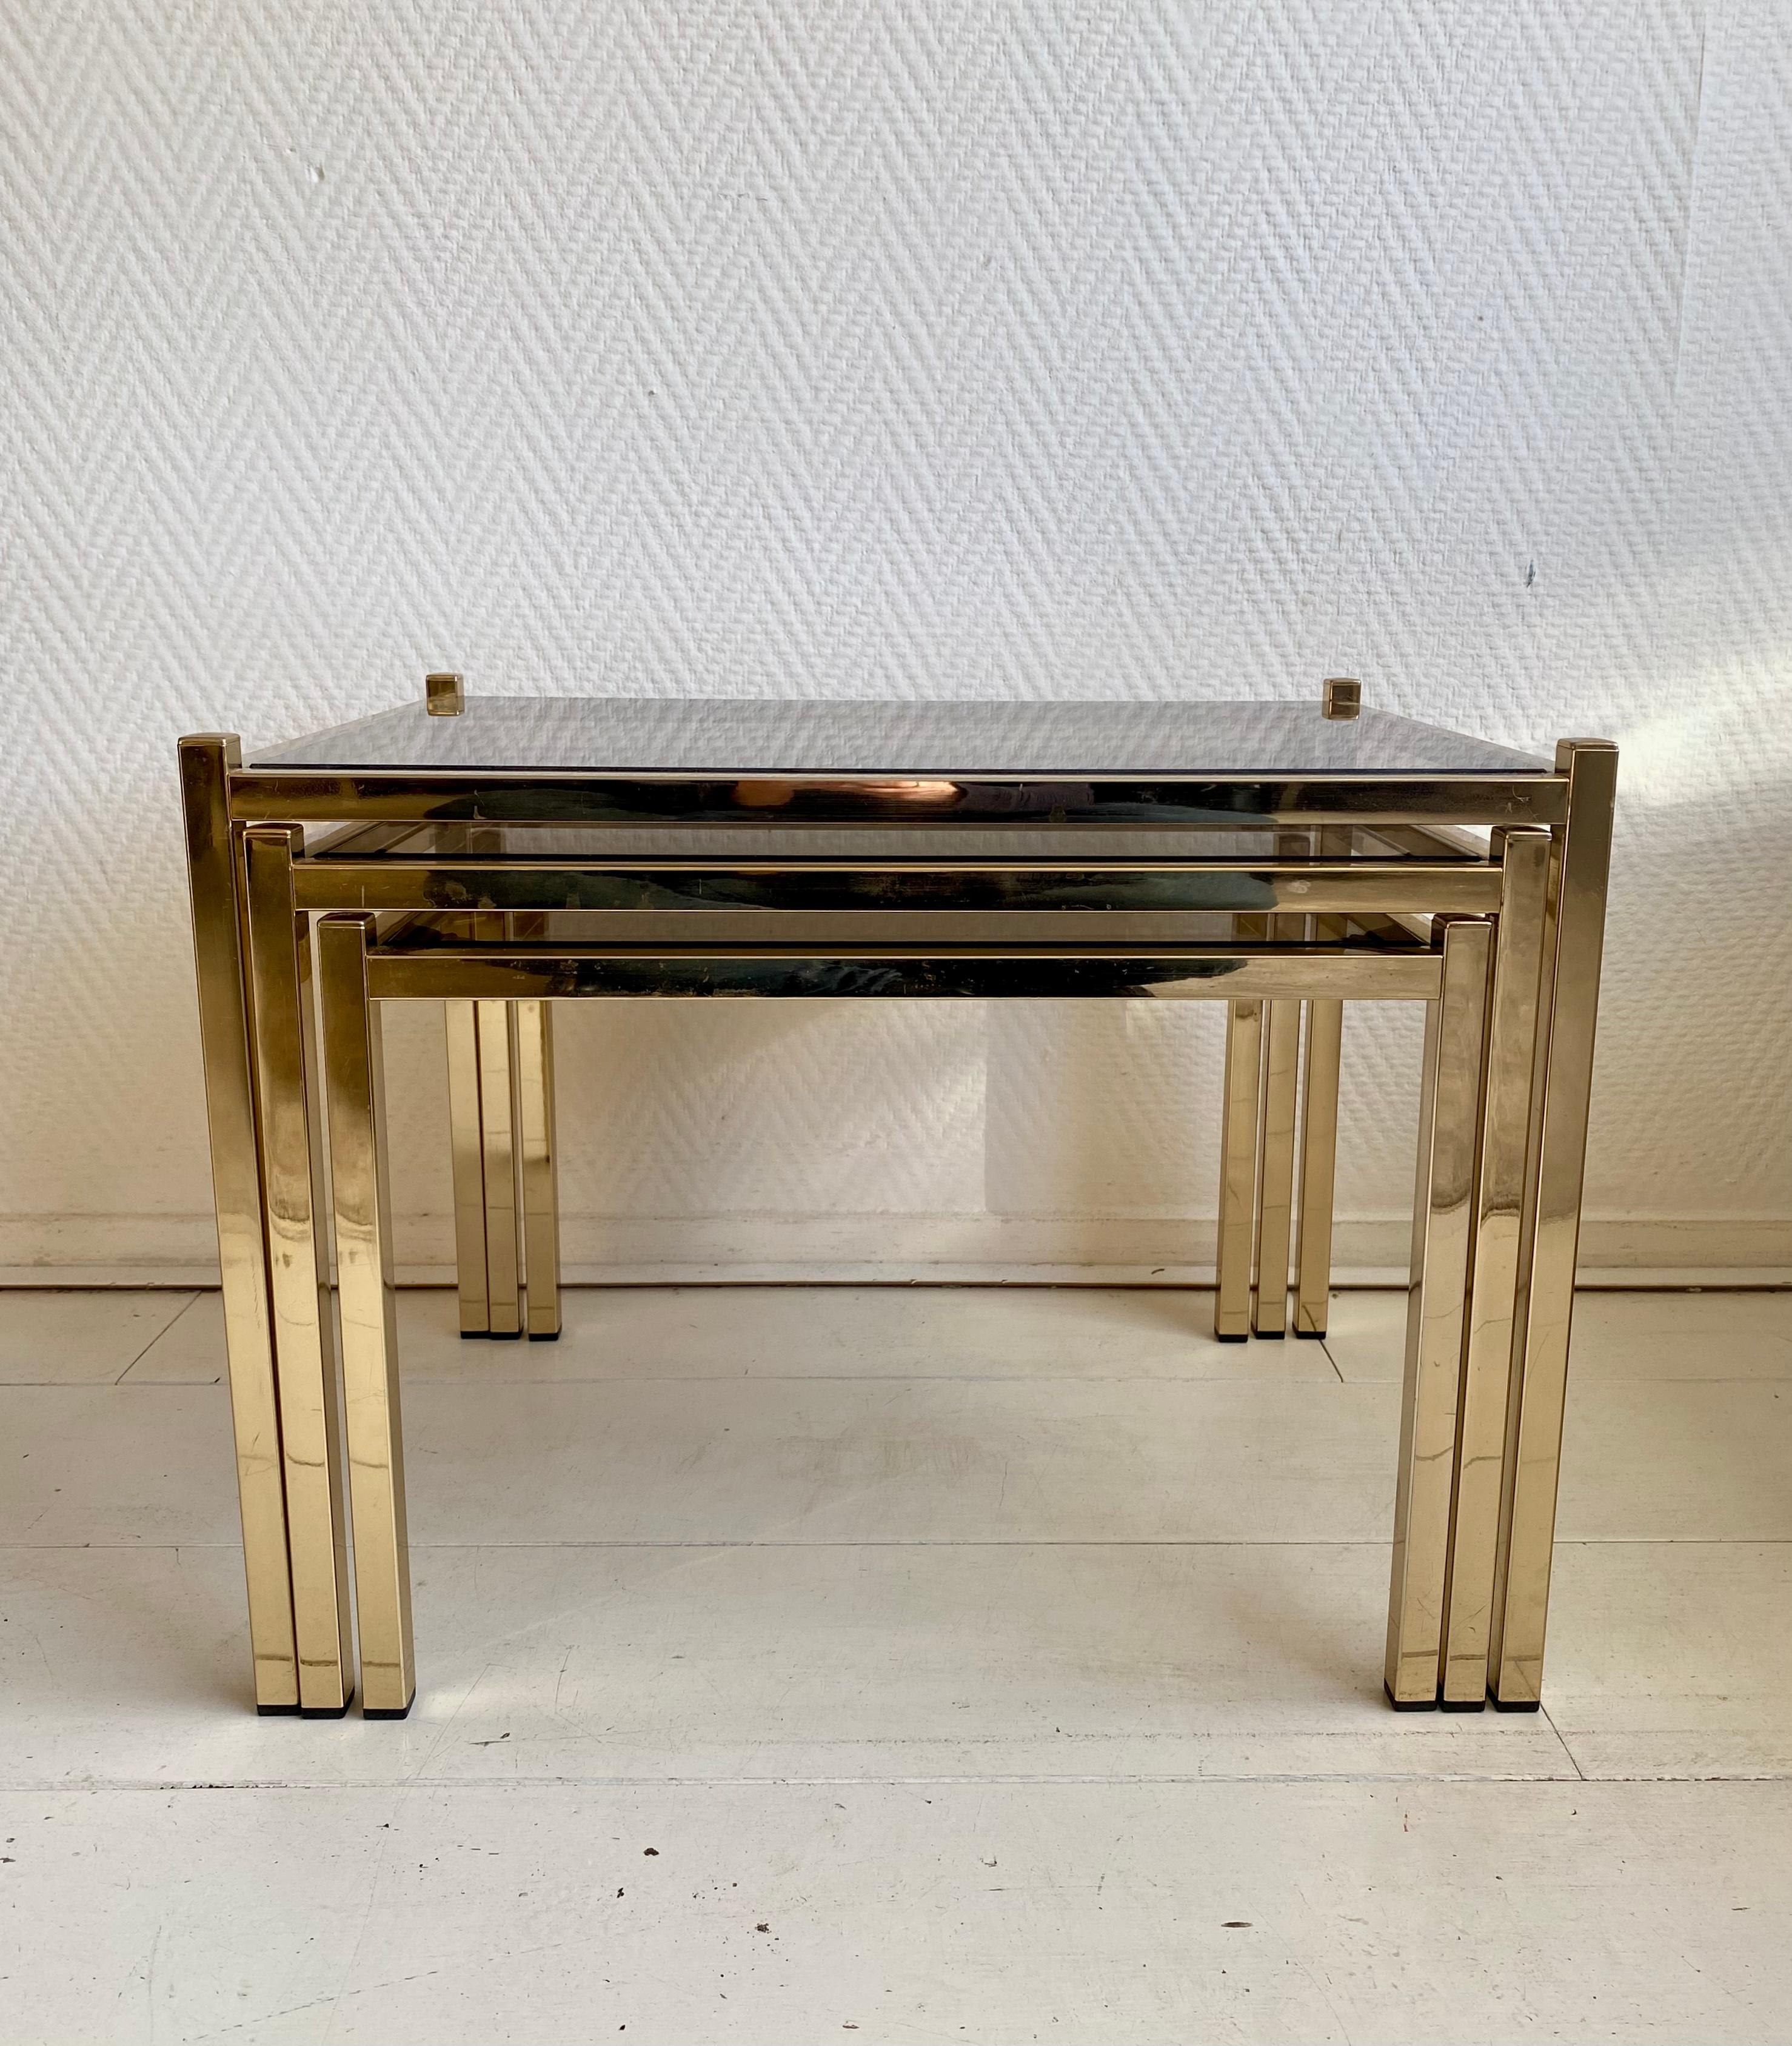 Set of three European 20th century brass and Smoked glass Nesting tables. The set has a warm and rich appearance with normal/light wear for their age. 